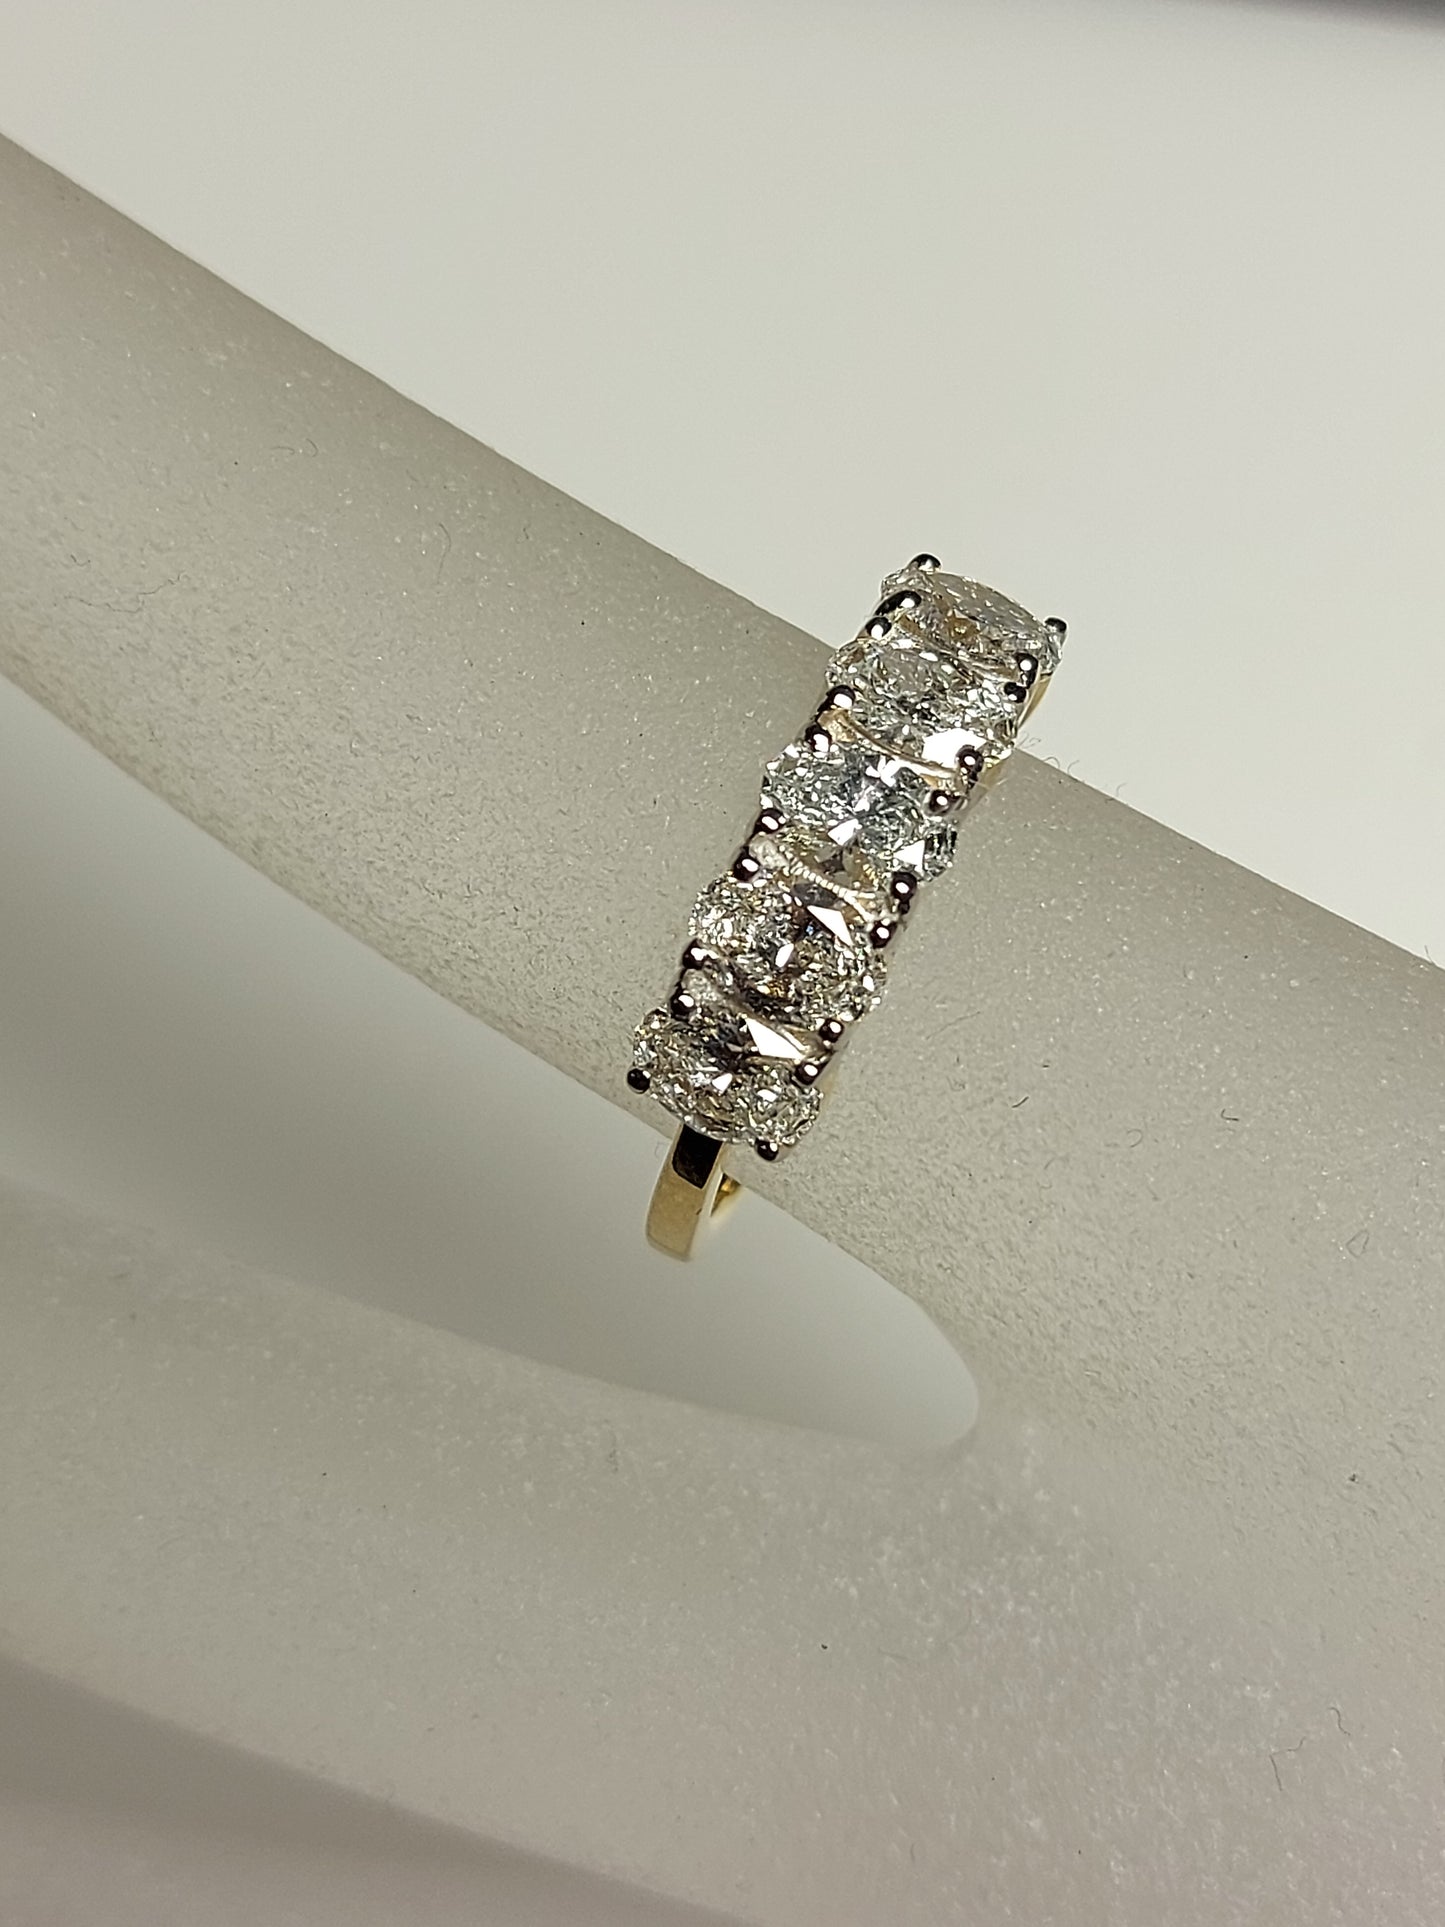 5 Stone Oval Cut Diamond Ring / Wedding Band in Gold